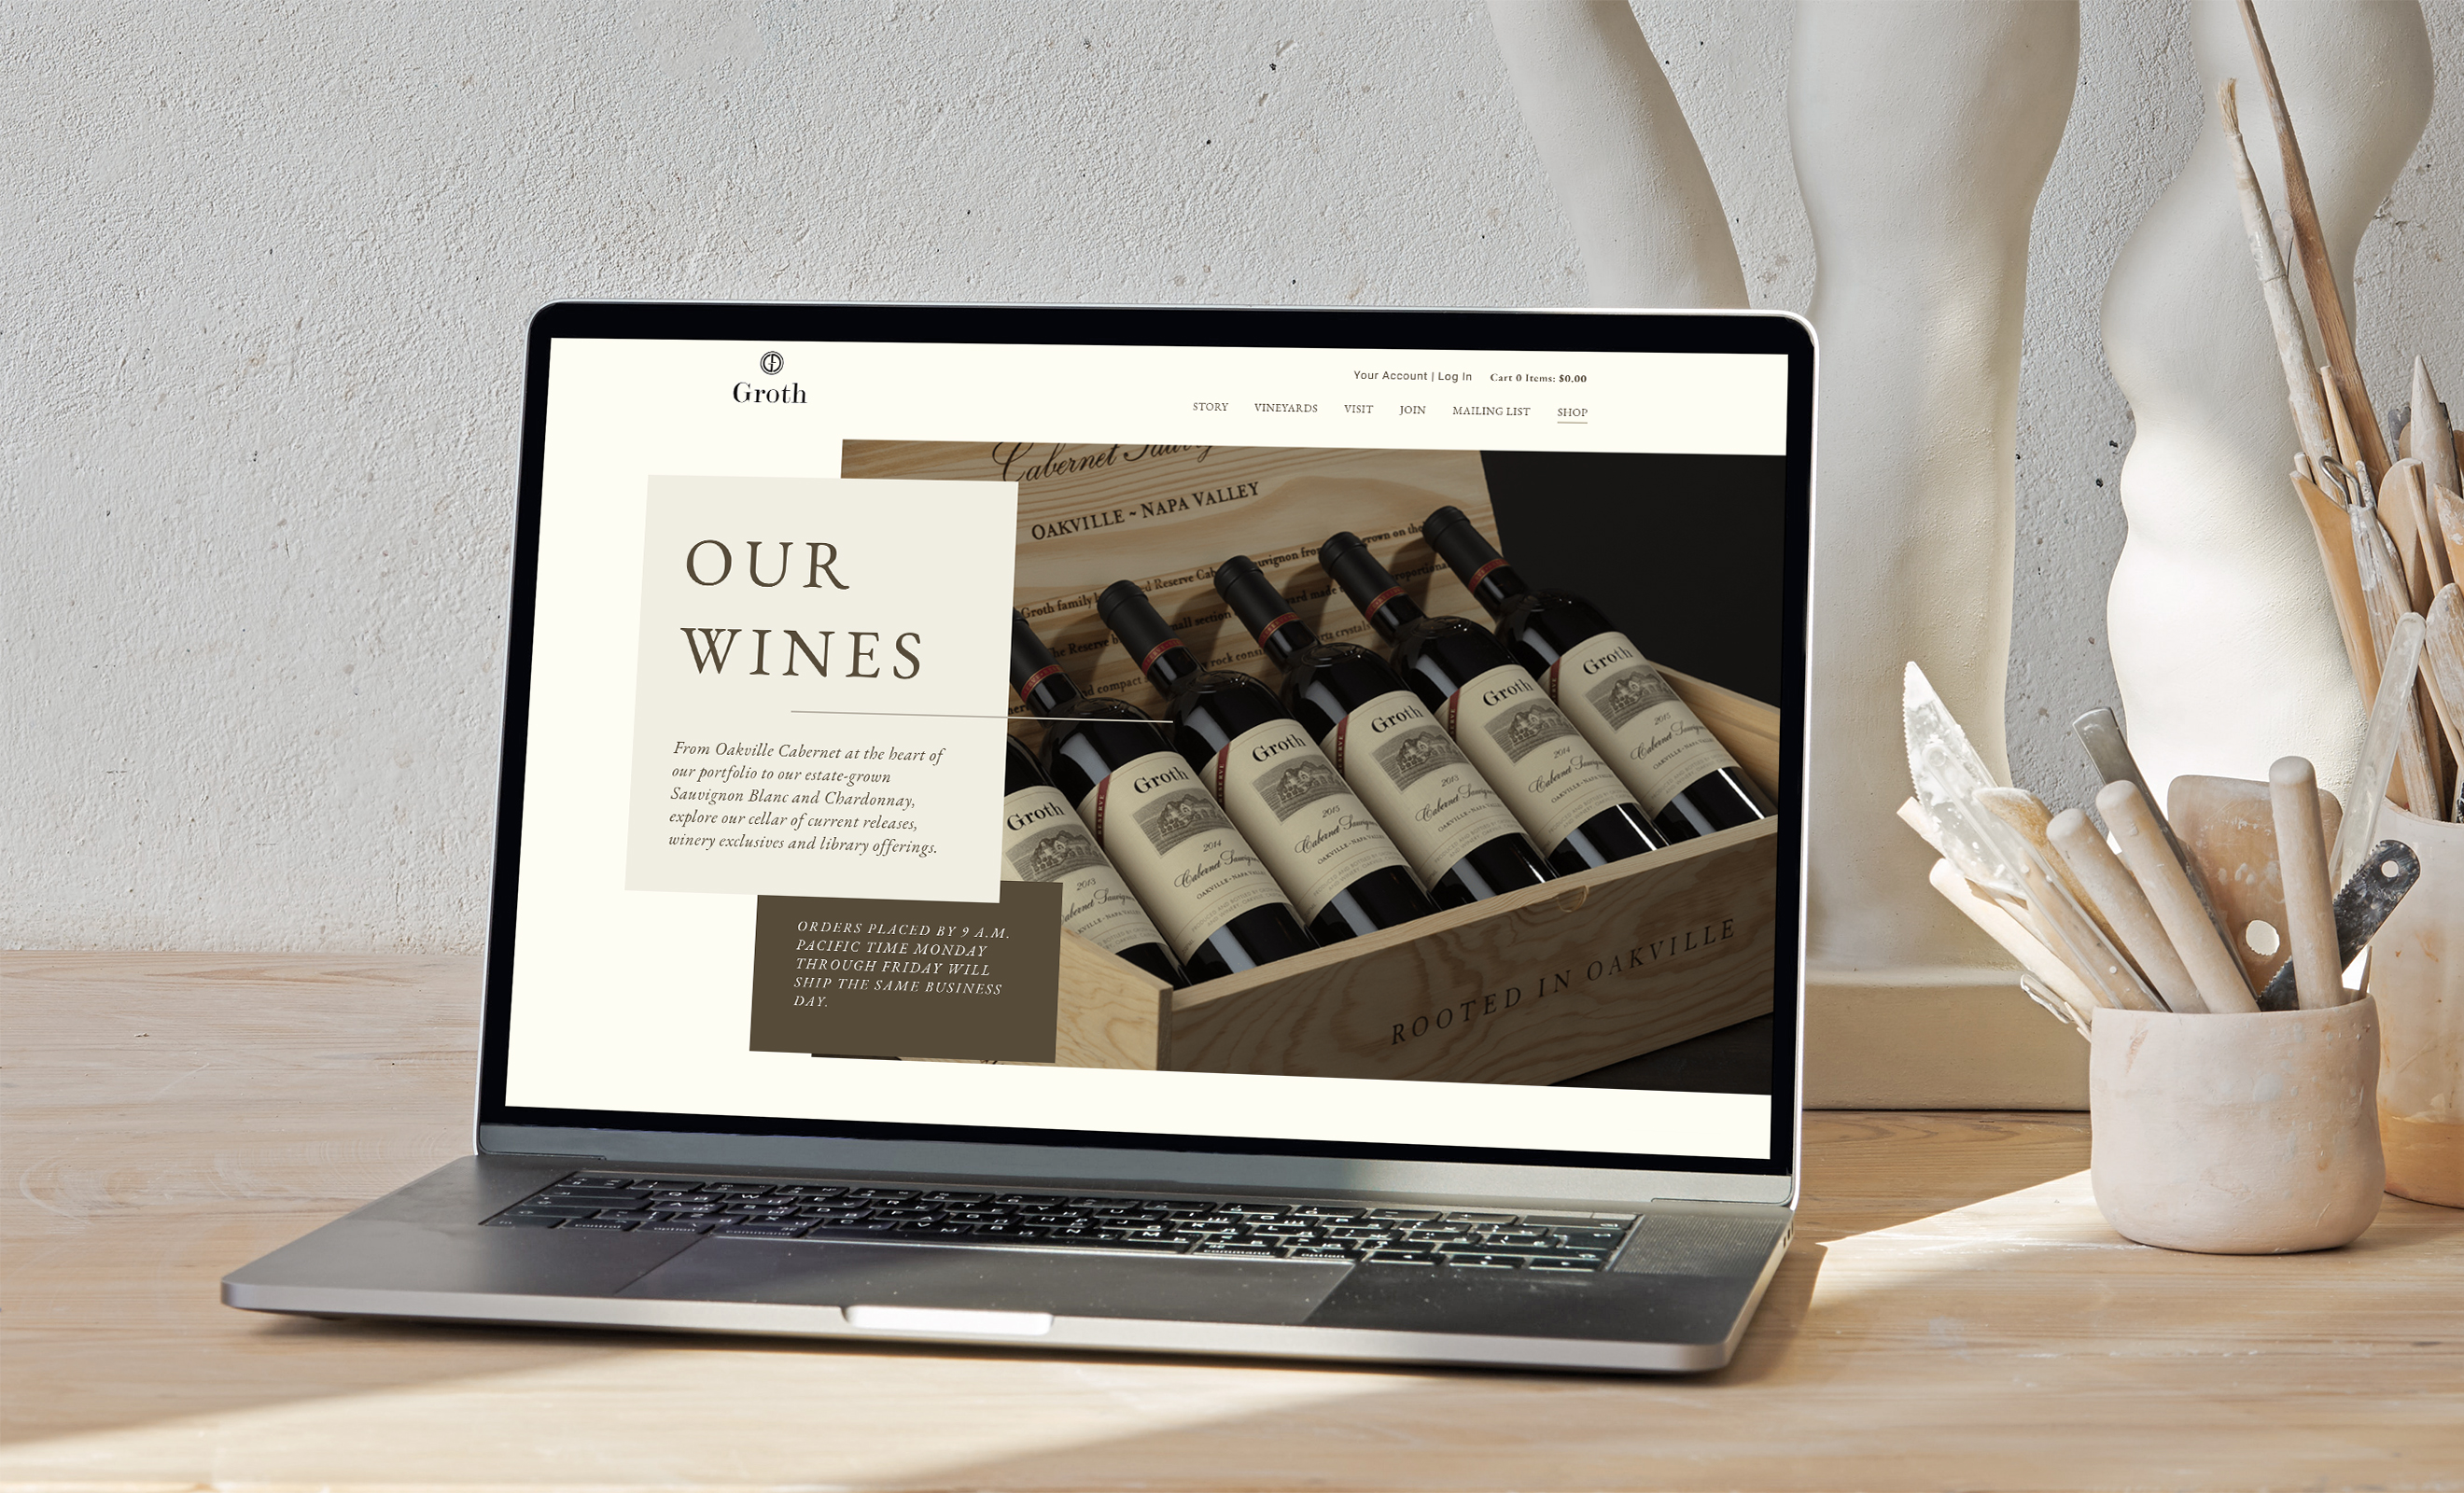 Groth Our Wines Page Website Design Shown on Laptop